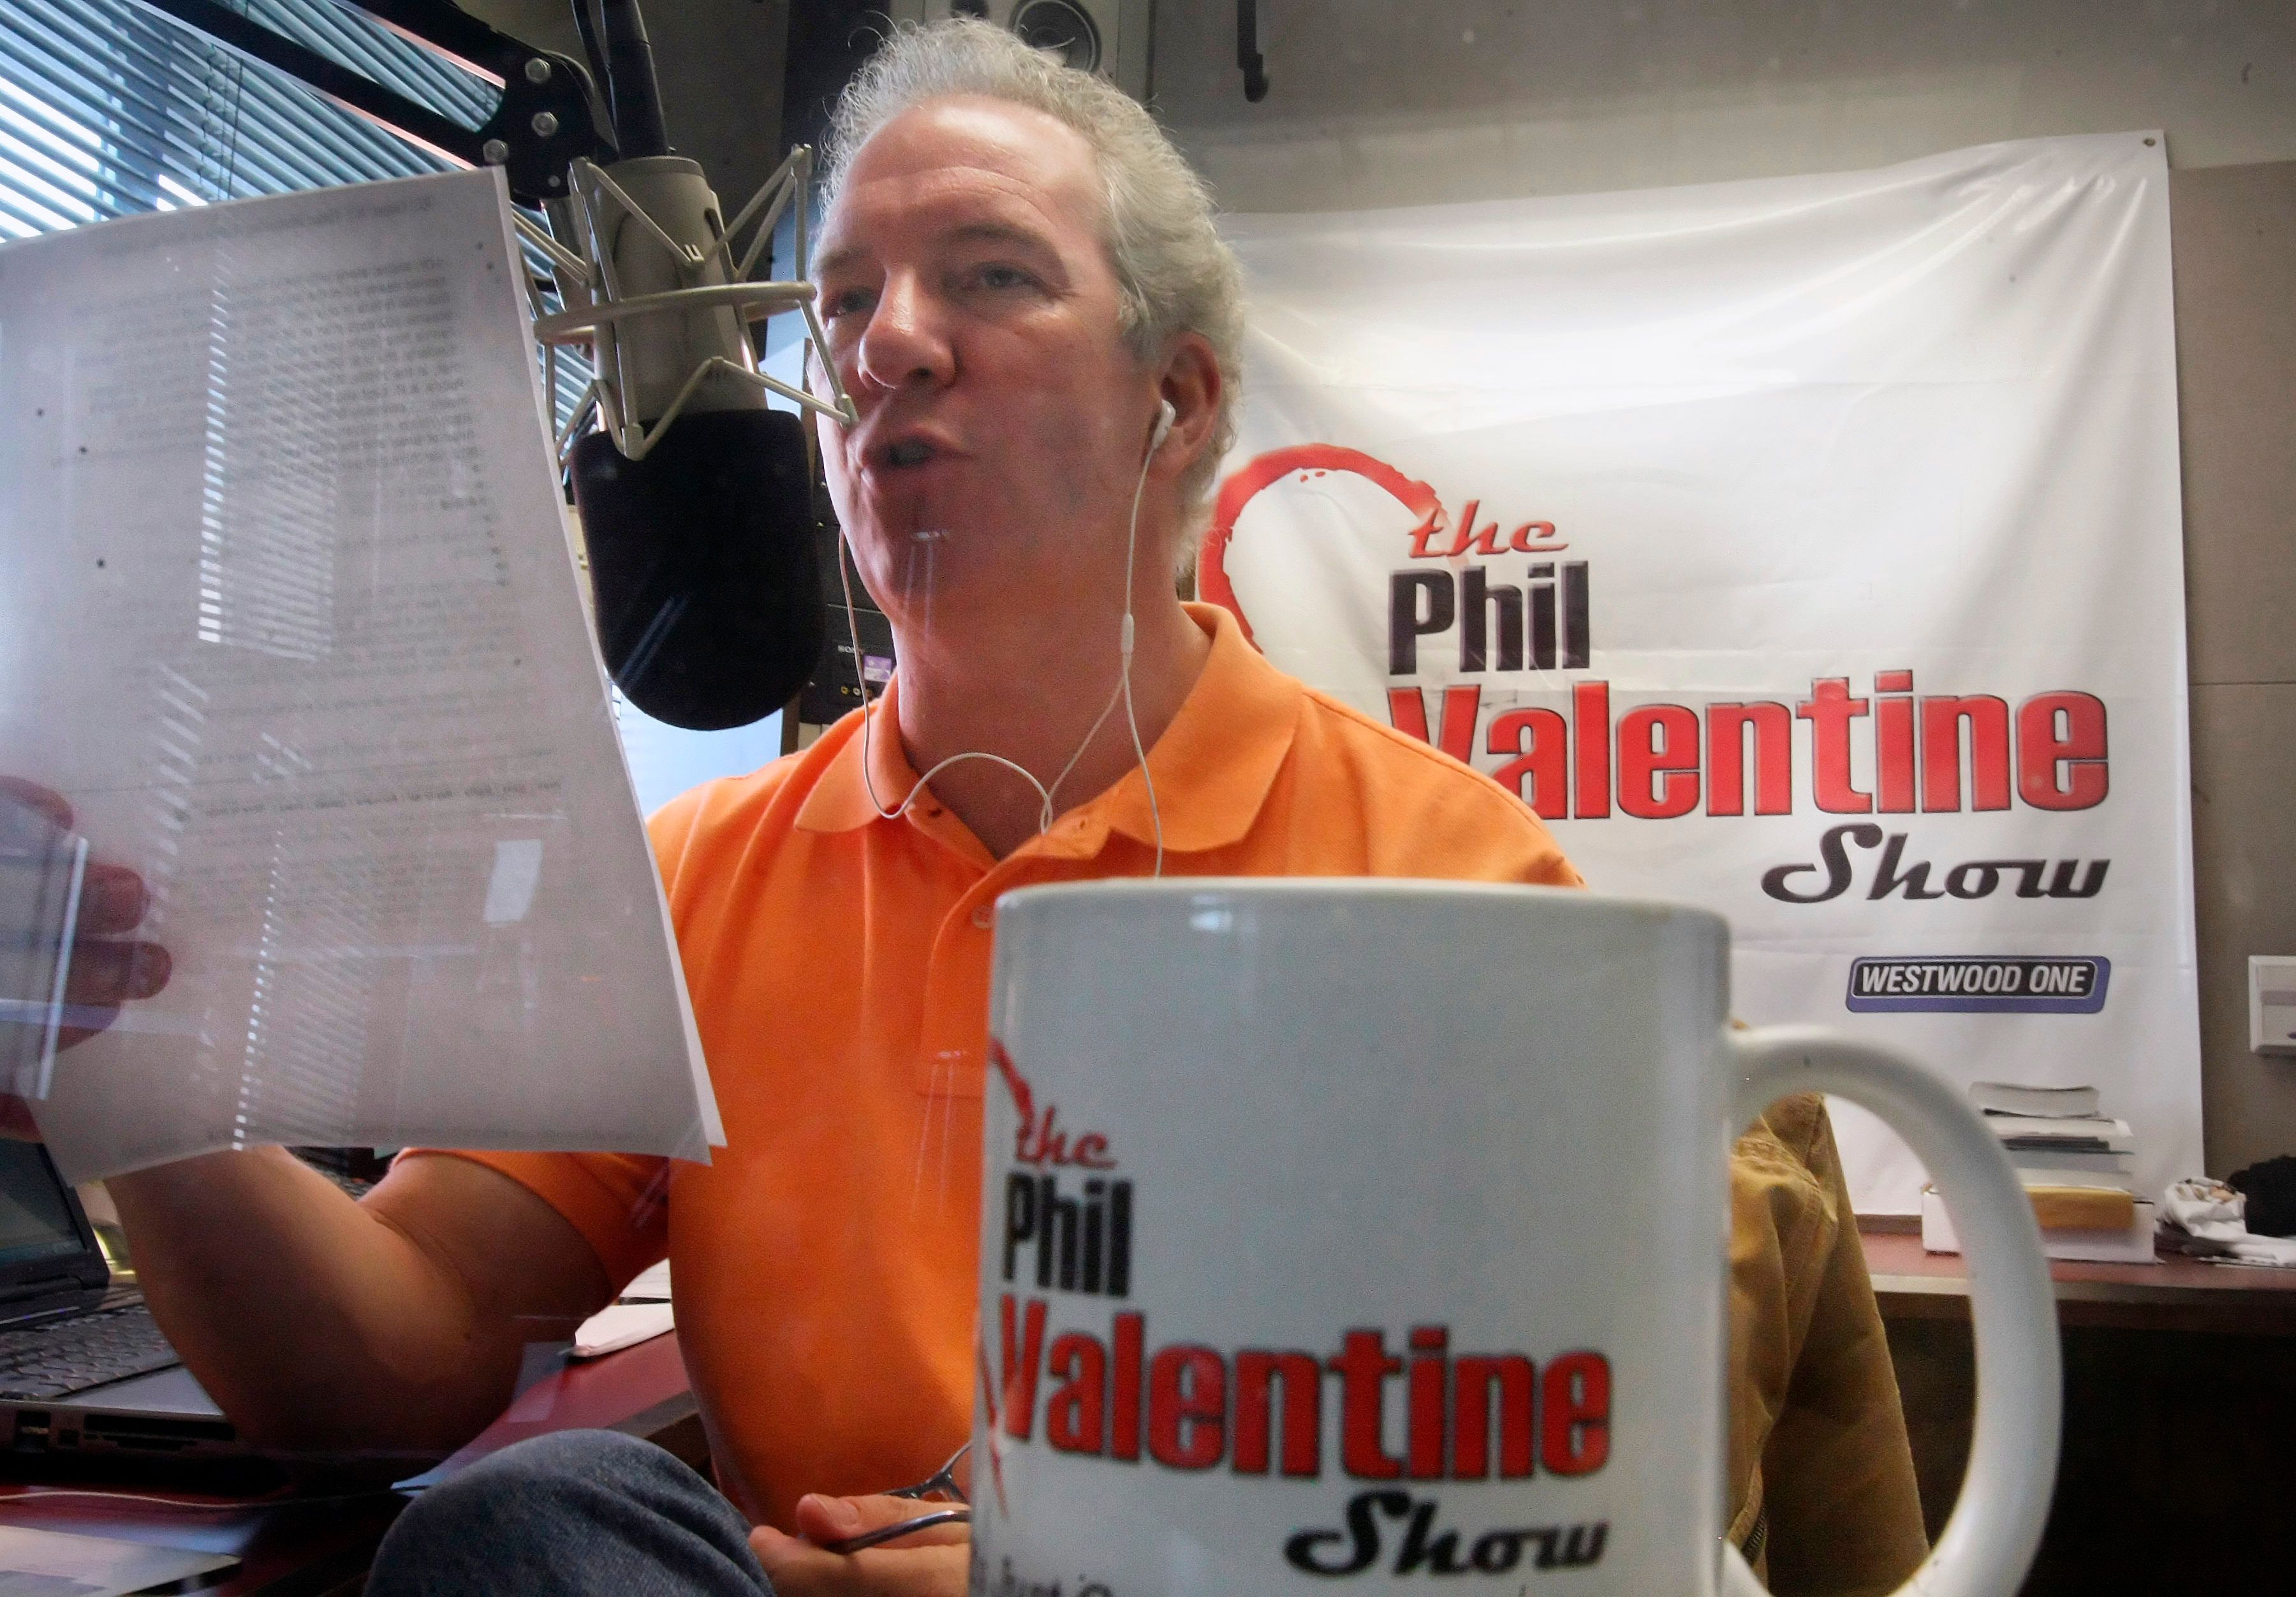 Conservative talk show host Phil Valentine, seen in 2009, has died after being hospitalised with Covid-19,...